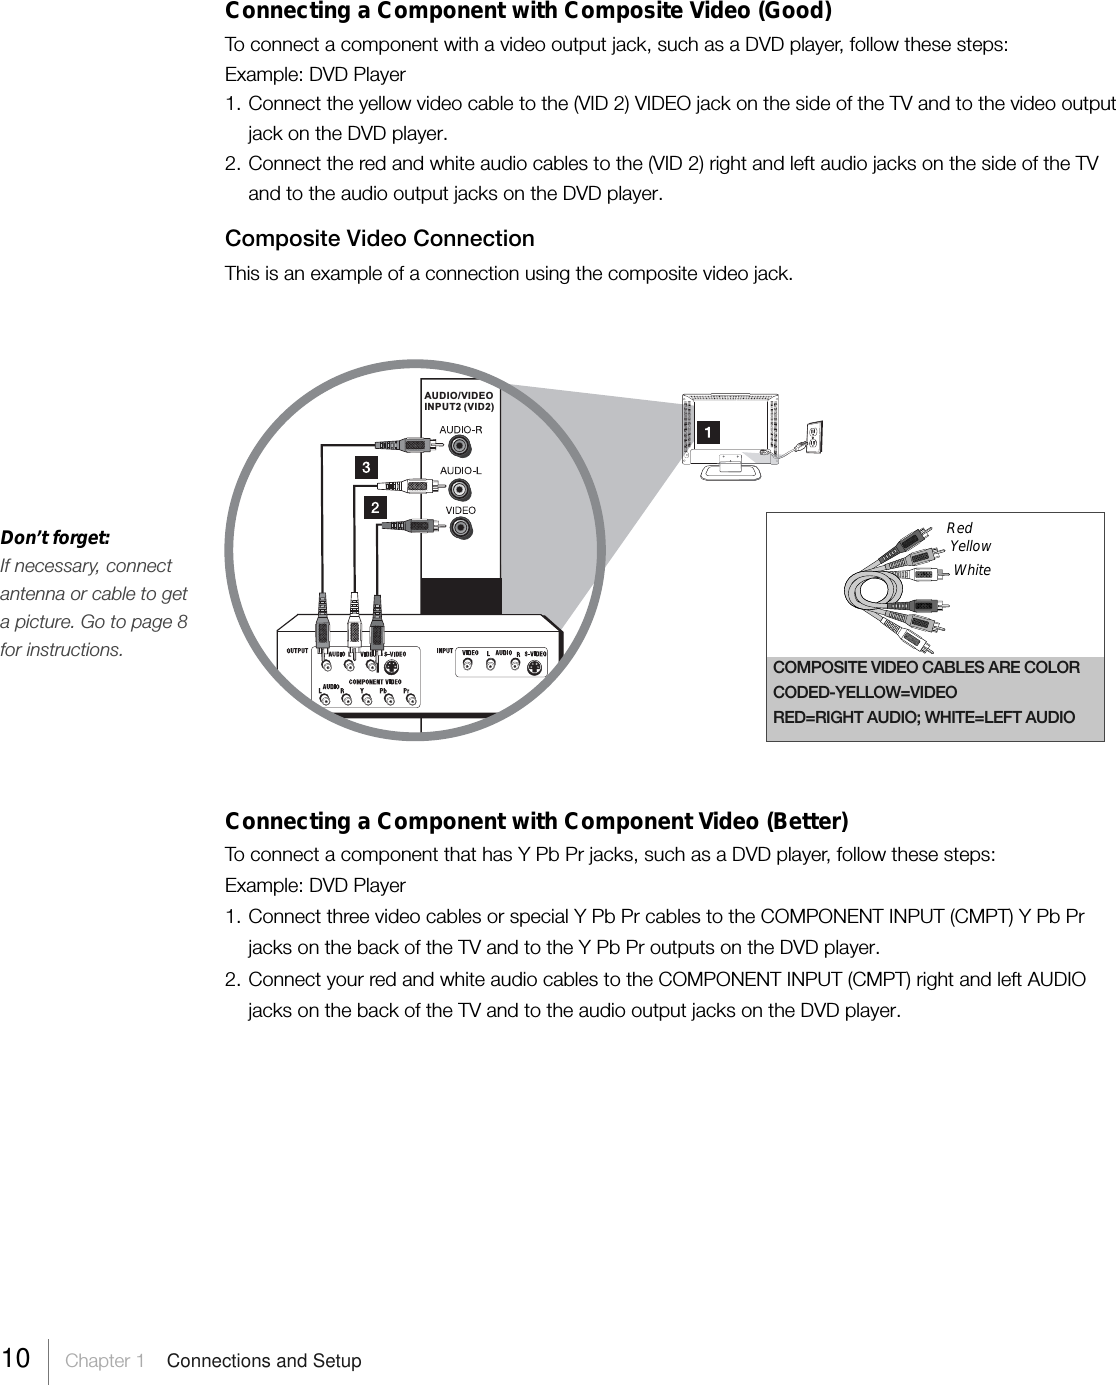 Don’t forget:If necessary, connectantenna or cable to geta picture. Go to page 8for instructions.Connecting a Component with Composite Video (Good)To connect a component with a video output jack, such as a DVD player, follow these steps:Example: DVD Player1. Connect the yellow video cable to the (VID 2) VIDEO jack on the side of the TV and to the video outputjack on the DVD player.2. Connect the red and white audio cables to the (VID 2) right and left audio jacks on the side of the TVand to the audio output jacks on the DVD player.Composite Video ConnectionThis is an example of a connection using the composite video jack.Connecting a Component with Component Video (Better)To connect a component that has Y Pb Pr jacks, such as a DVD player, follow these steps:Example: DVD Player1. Connect three video cables or special Y Pb Pr cables to the COMPONENT INPUT (CMPT) Y Pb Prjacks on the back of the TV and to the Y Pb Pr outputs on the DVD player.2. Connect your red and white audio cables to the COMPONENT INPUT (CMPT) right and left AUDIOjacks on the back of the TV and to the audio output jacks on the DVD player.AUDIO/VIDEOINPUT2 (VID2)10     Chapter 1    Connections and SetupCOMPOSITE VIDEO CABLES ARE COLORCODED-YELLOW=VIDEORED=RIGHT AUDIO; WHITE=LEFT AUDIORedYellowWhite